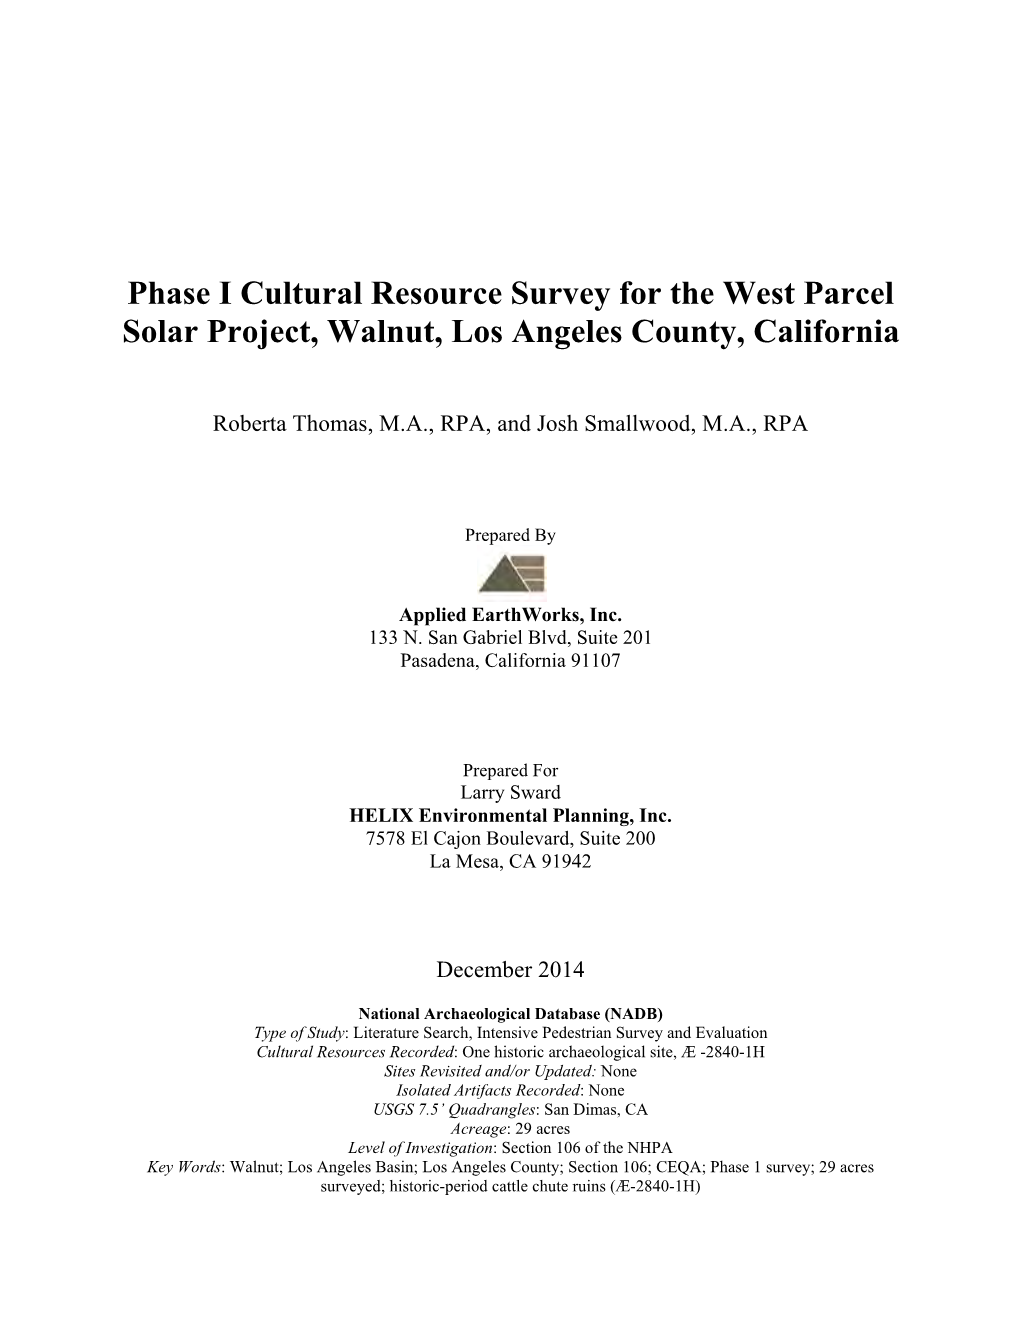 Phase I Cultural Resource Survey for the West Parcel Solar Project, Walnut, Los Angeles County, California